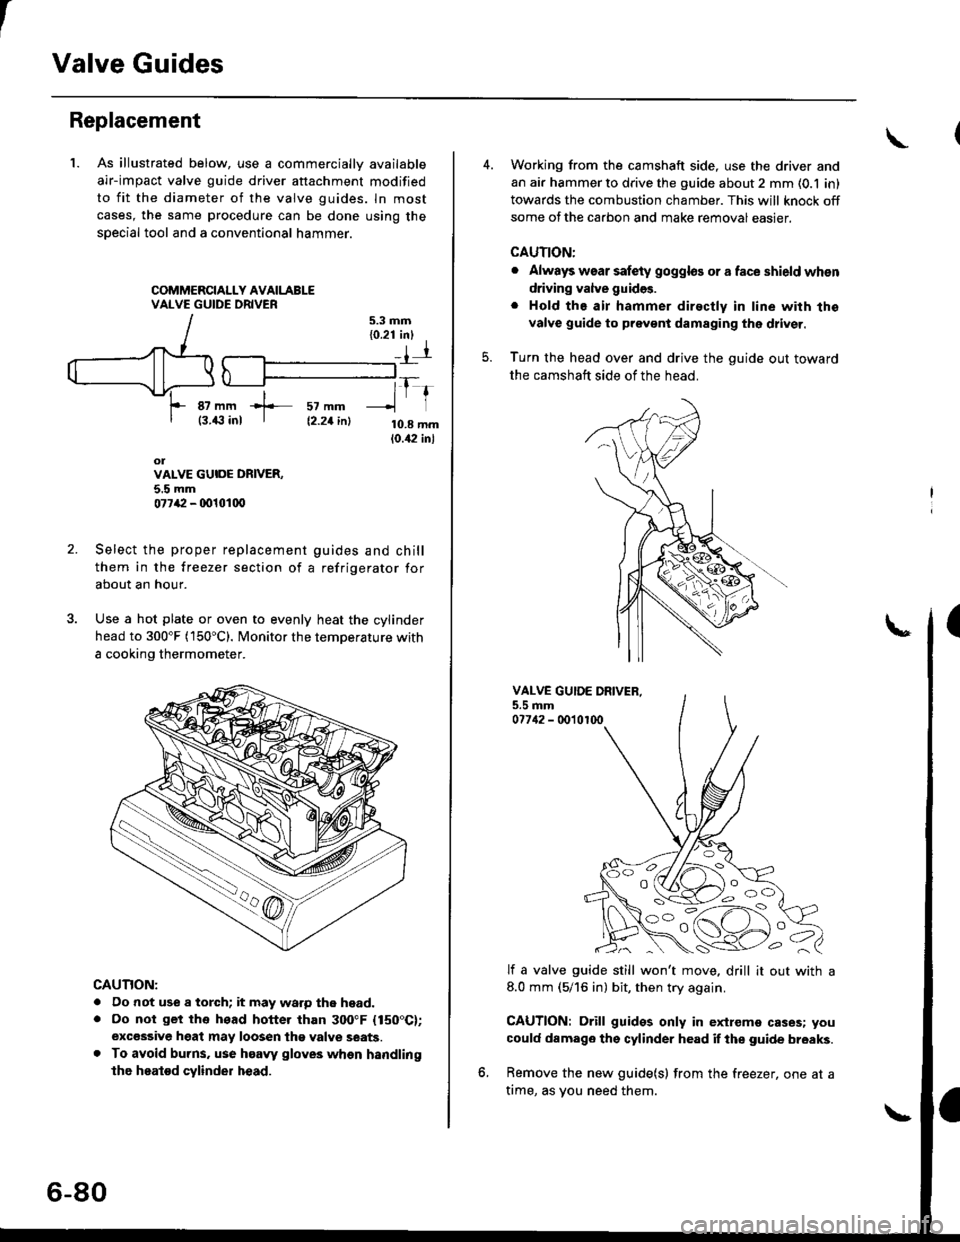 HONDA CIVIC 2000 6.G Workshop Manual t
Valve Guides
Replacement
1. As illustrated below, use a commerciallv available
air-impact valve guide driver attachment modified
to fit the diameter of the valve guides. ln most
cases, the same proc